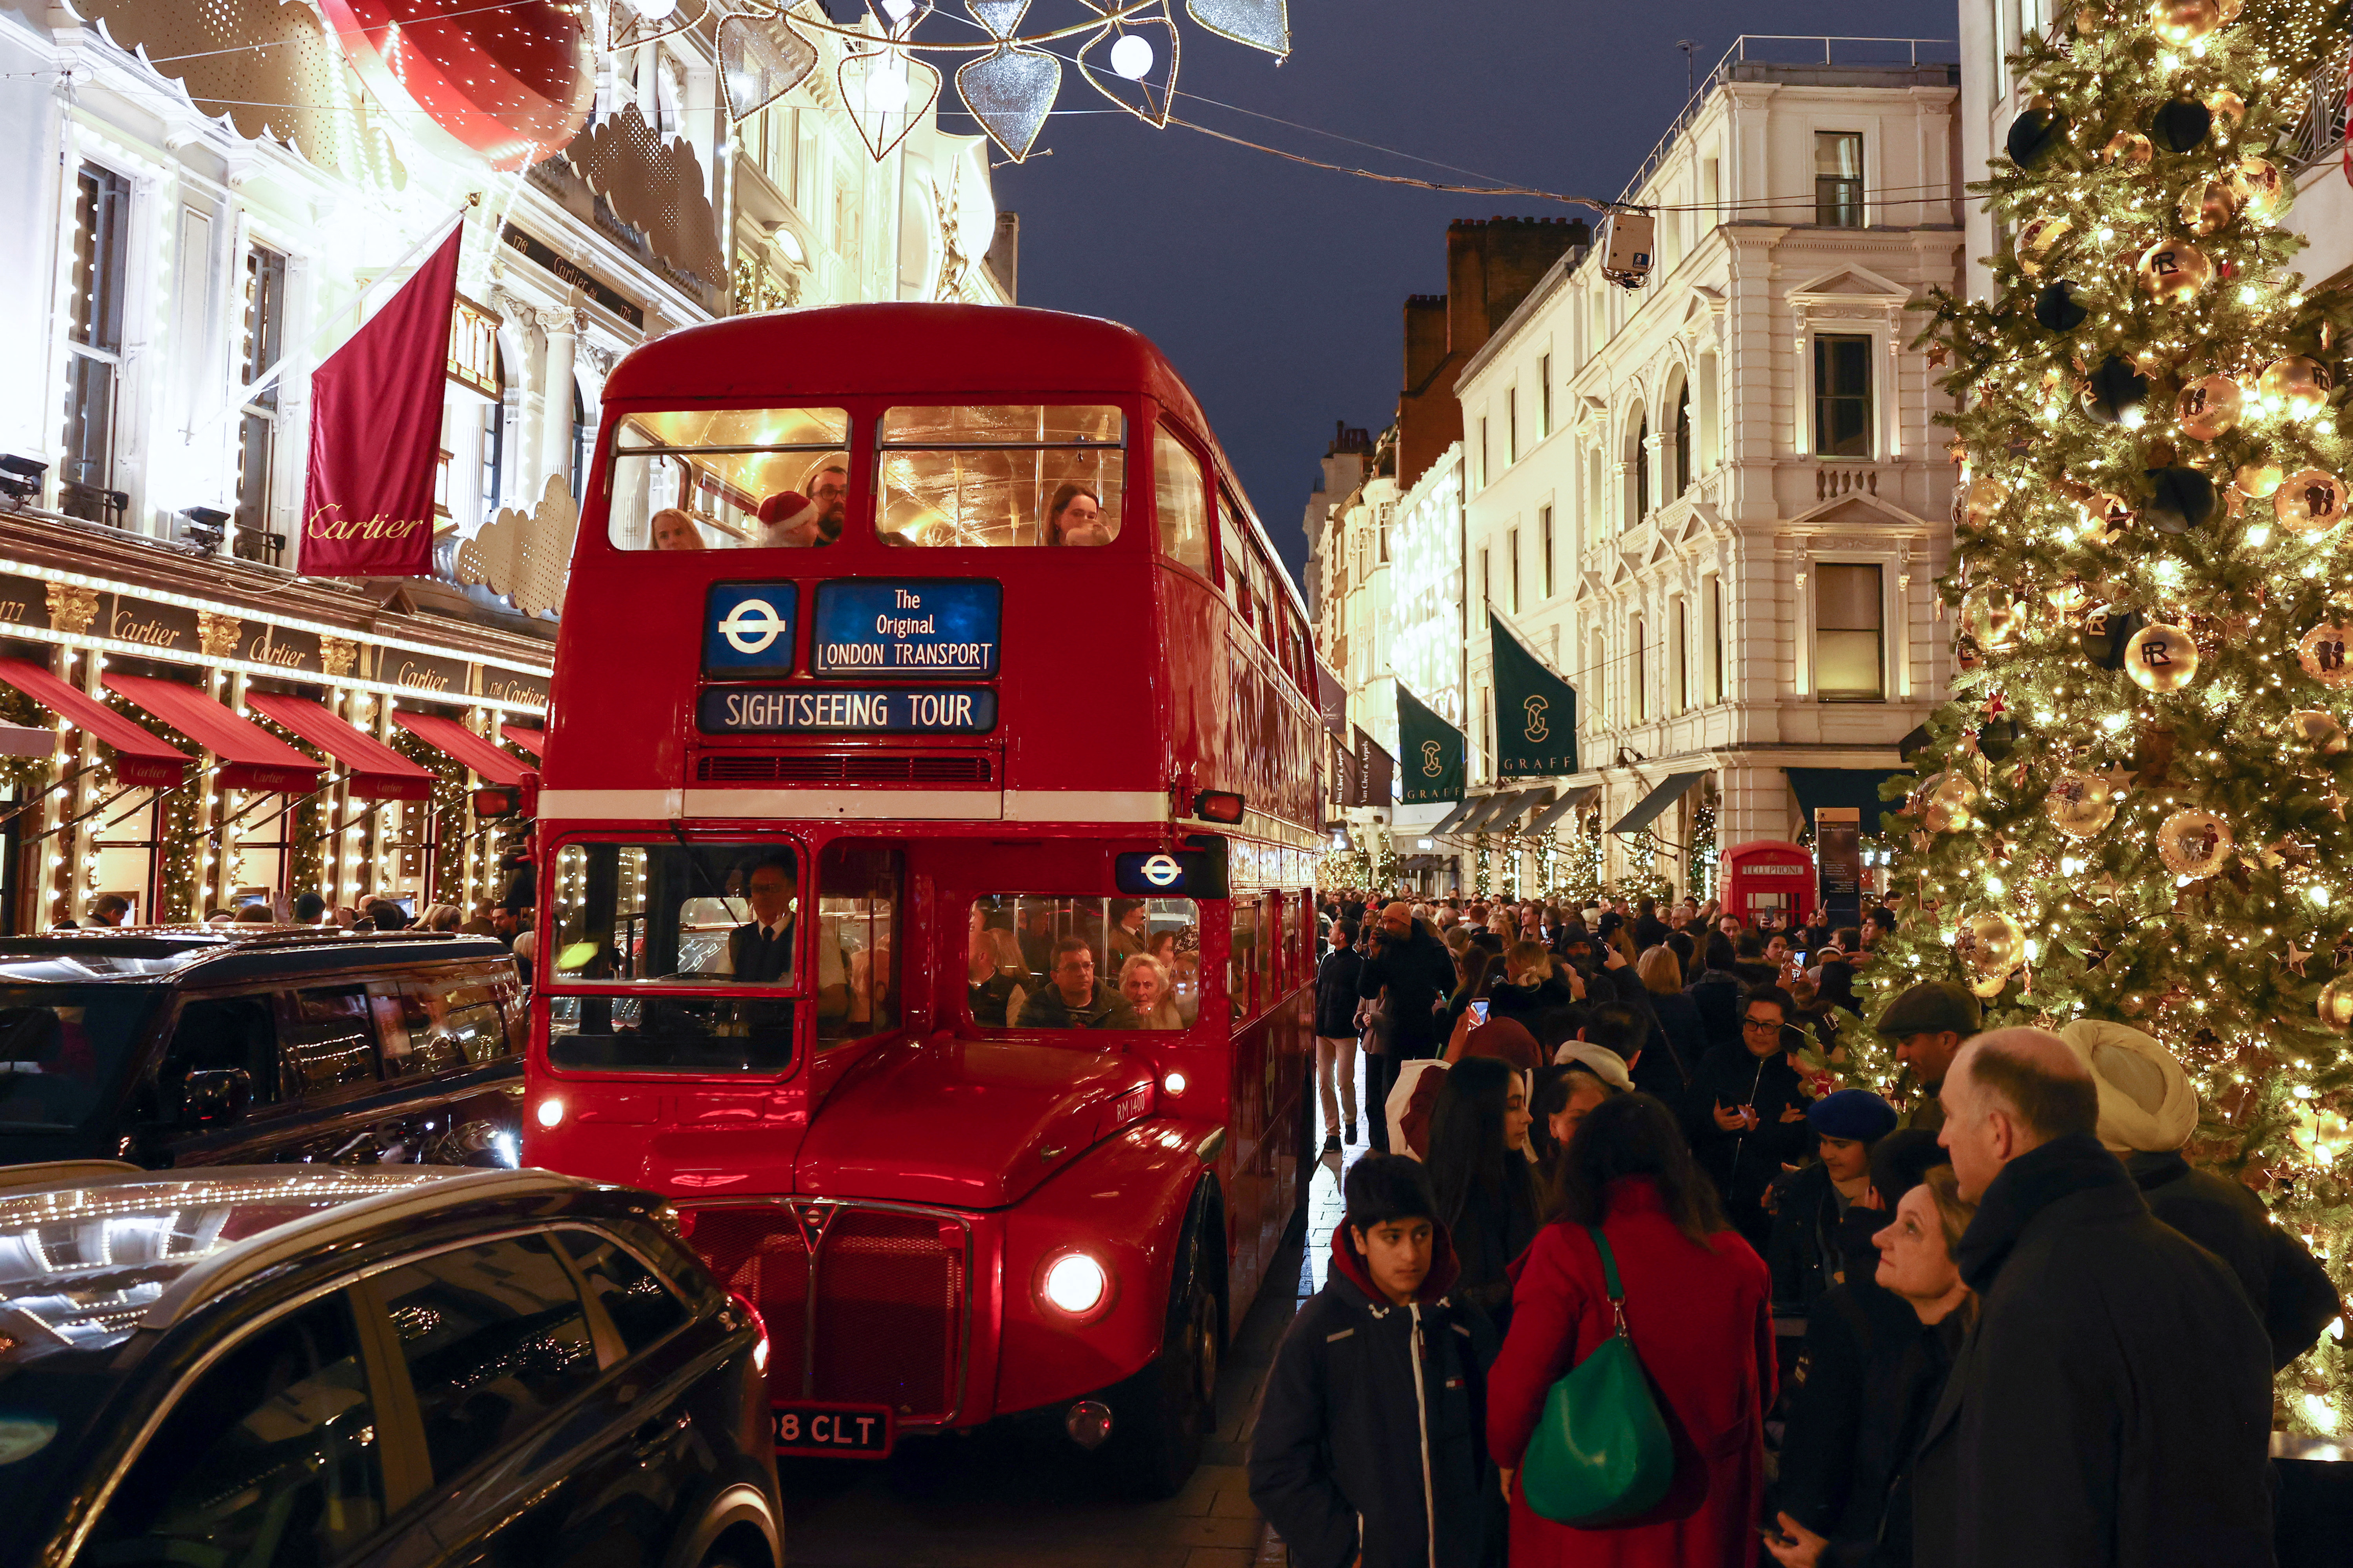 A Routemaster bus makes its way past shops with Christmas decorations on Bond Street